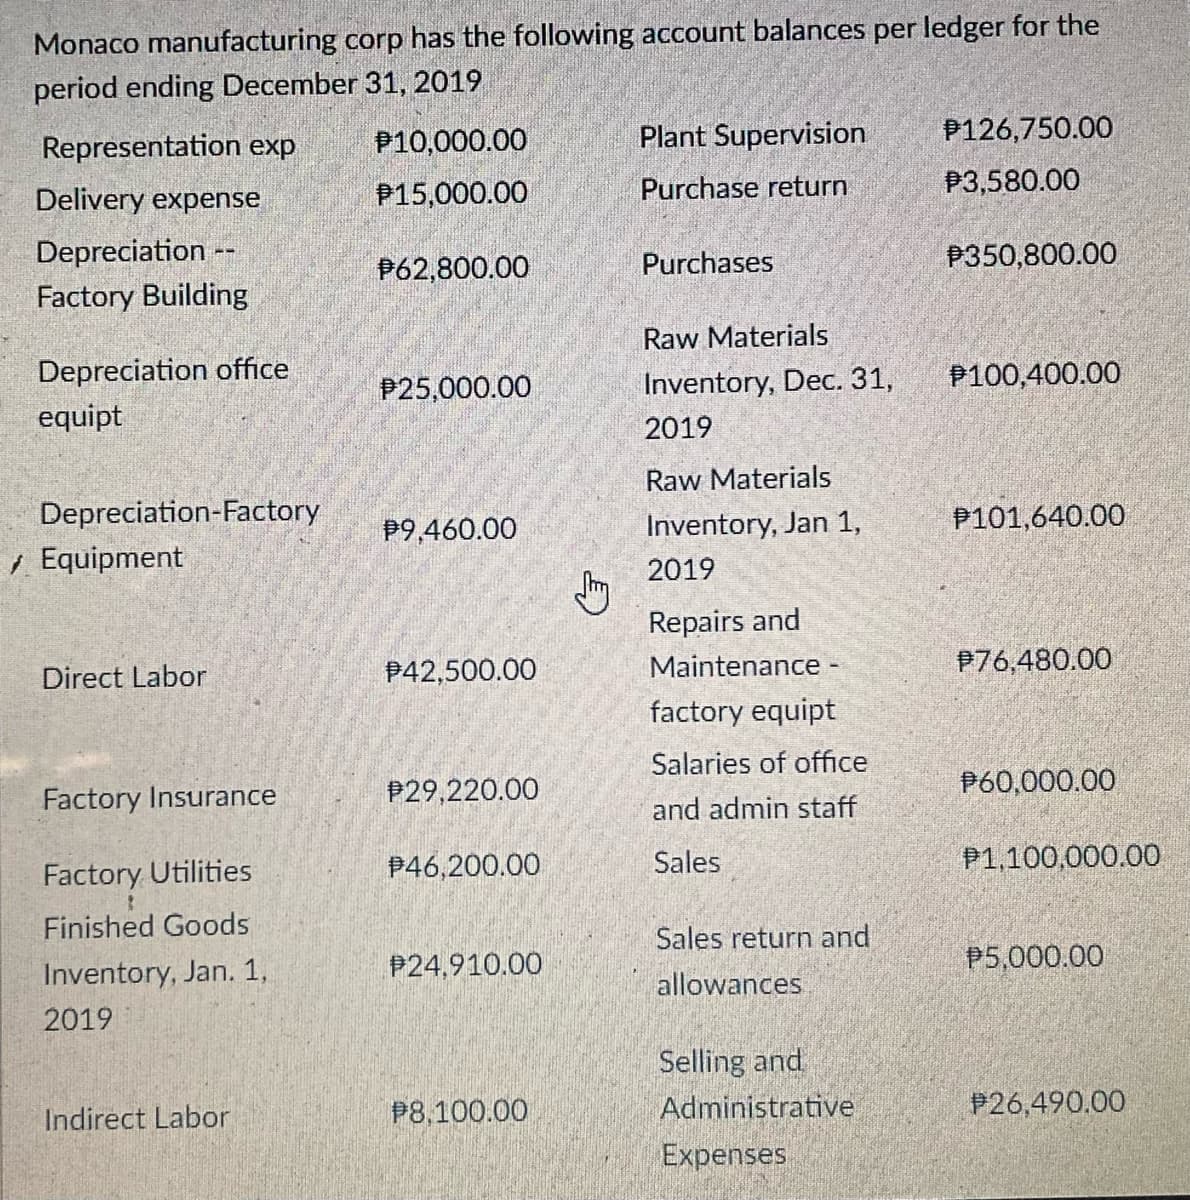 Monaco manufacturing corp has the following account balances per ledger for the
period ending December 31, 2019
Representation exp
P10,000.00
Plant Supervision
P126,750.00
Delivery expense
P15,000.00
Purchase return
P3,580.00
Depreciation --
Purchases
P350,800.00
P62,800.00
Factory Building
Raw Materials
Depreciation office
P25,000.00
Inventory, Dec. 31,
P100,400.00
equipt
2019
Raw Materials
Depreciation-Factory
P9,460.00
Inventory, Jan 1,
P101,640.00
/ Equipment
2019
Repairs and
Direct Labor
P42,500.00
Maintenance -
P76,480.00
factory equipt
Salaries of office
P29,220.00
P60,000.00
Factory Insurance
and admin staff
P46,200.00
Sales
P1,100,000.00
Factory Utilities
Finished Goods
Sales return and
P24,910.00
P5,000.00
Inventory, Jan. 1,
allowances
2019
Selling and
Administrative
Indirect Labor
P8,100.00
P26,490.00
Expenses
